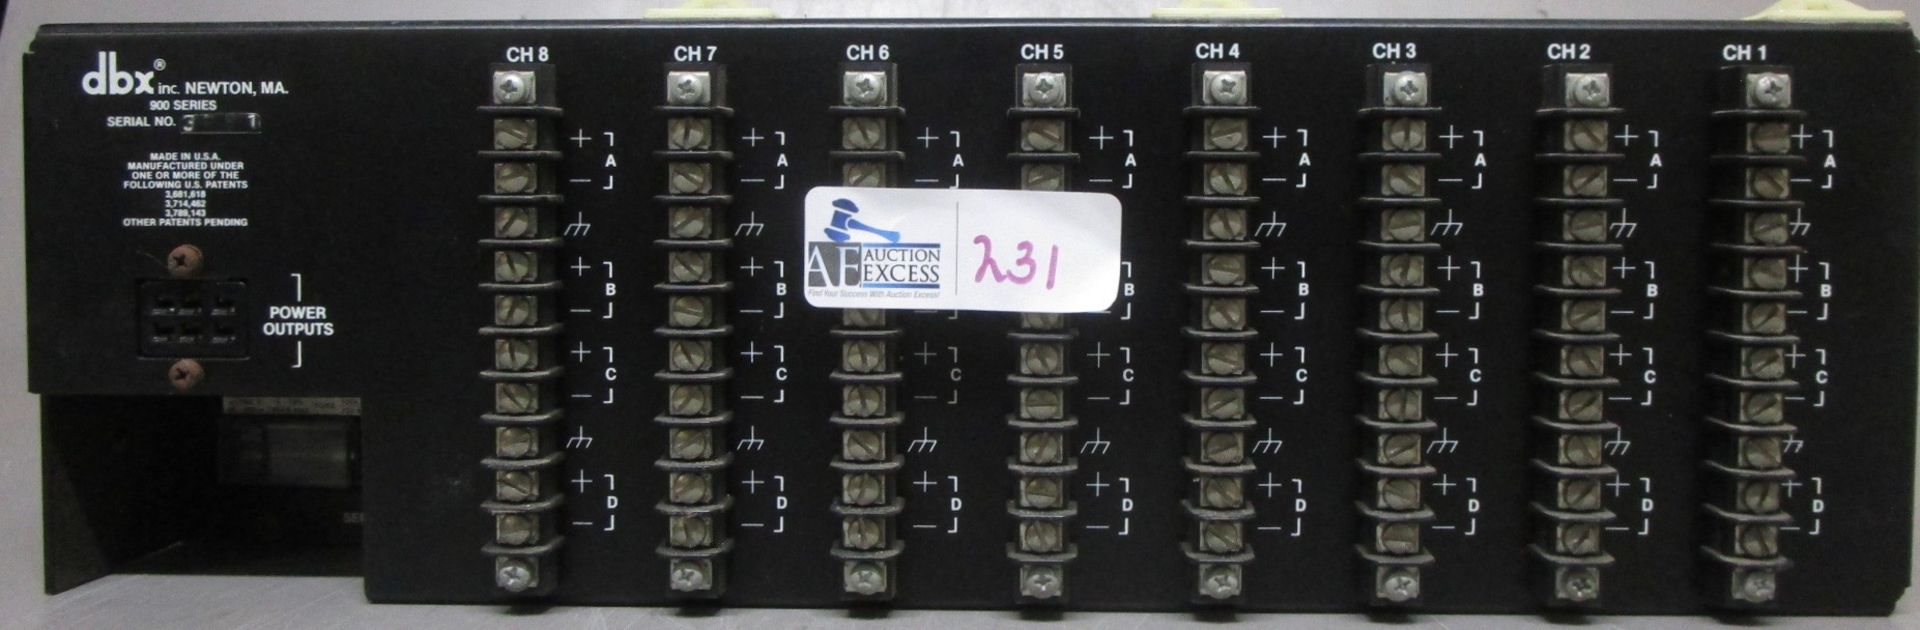 DBX 900 SERIES WITH 411 CARDS - Image 2 of 2